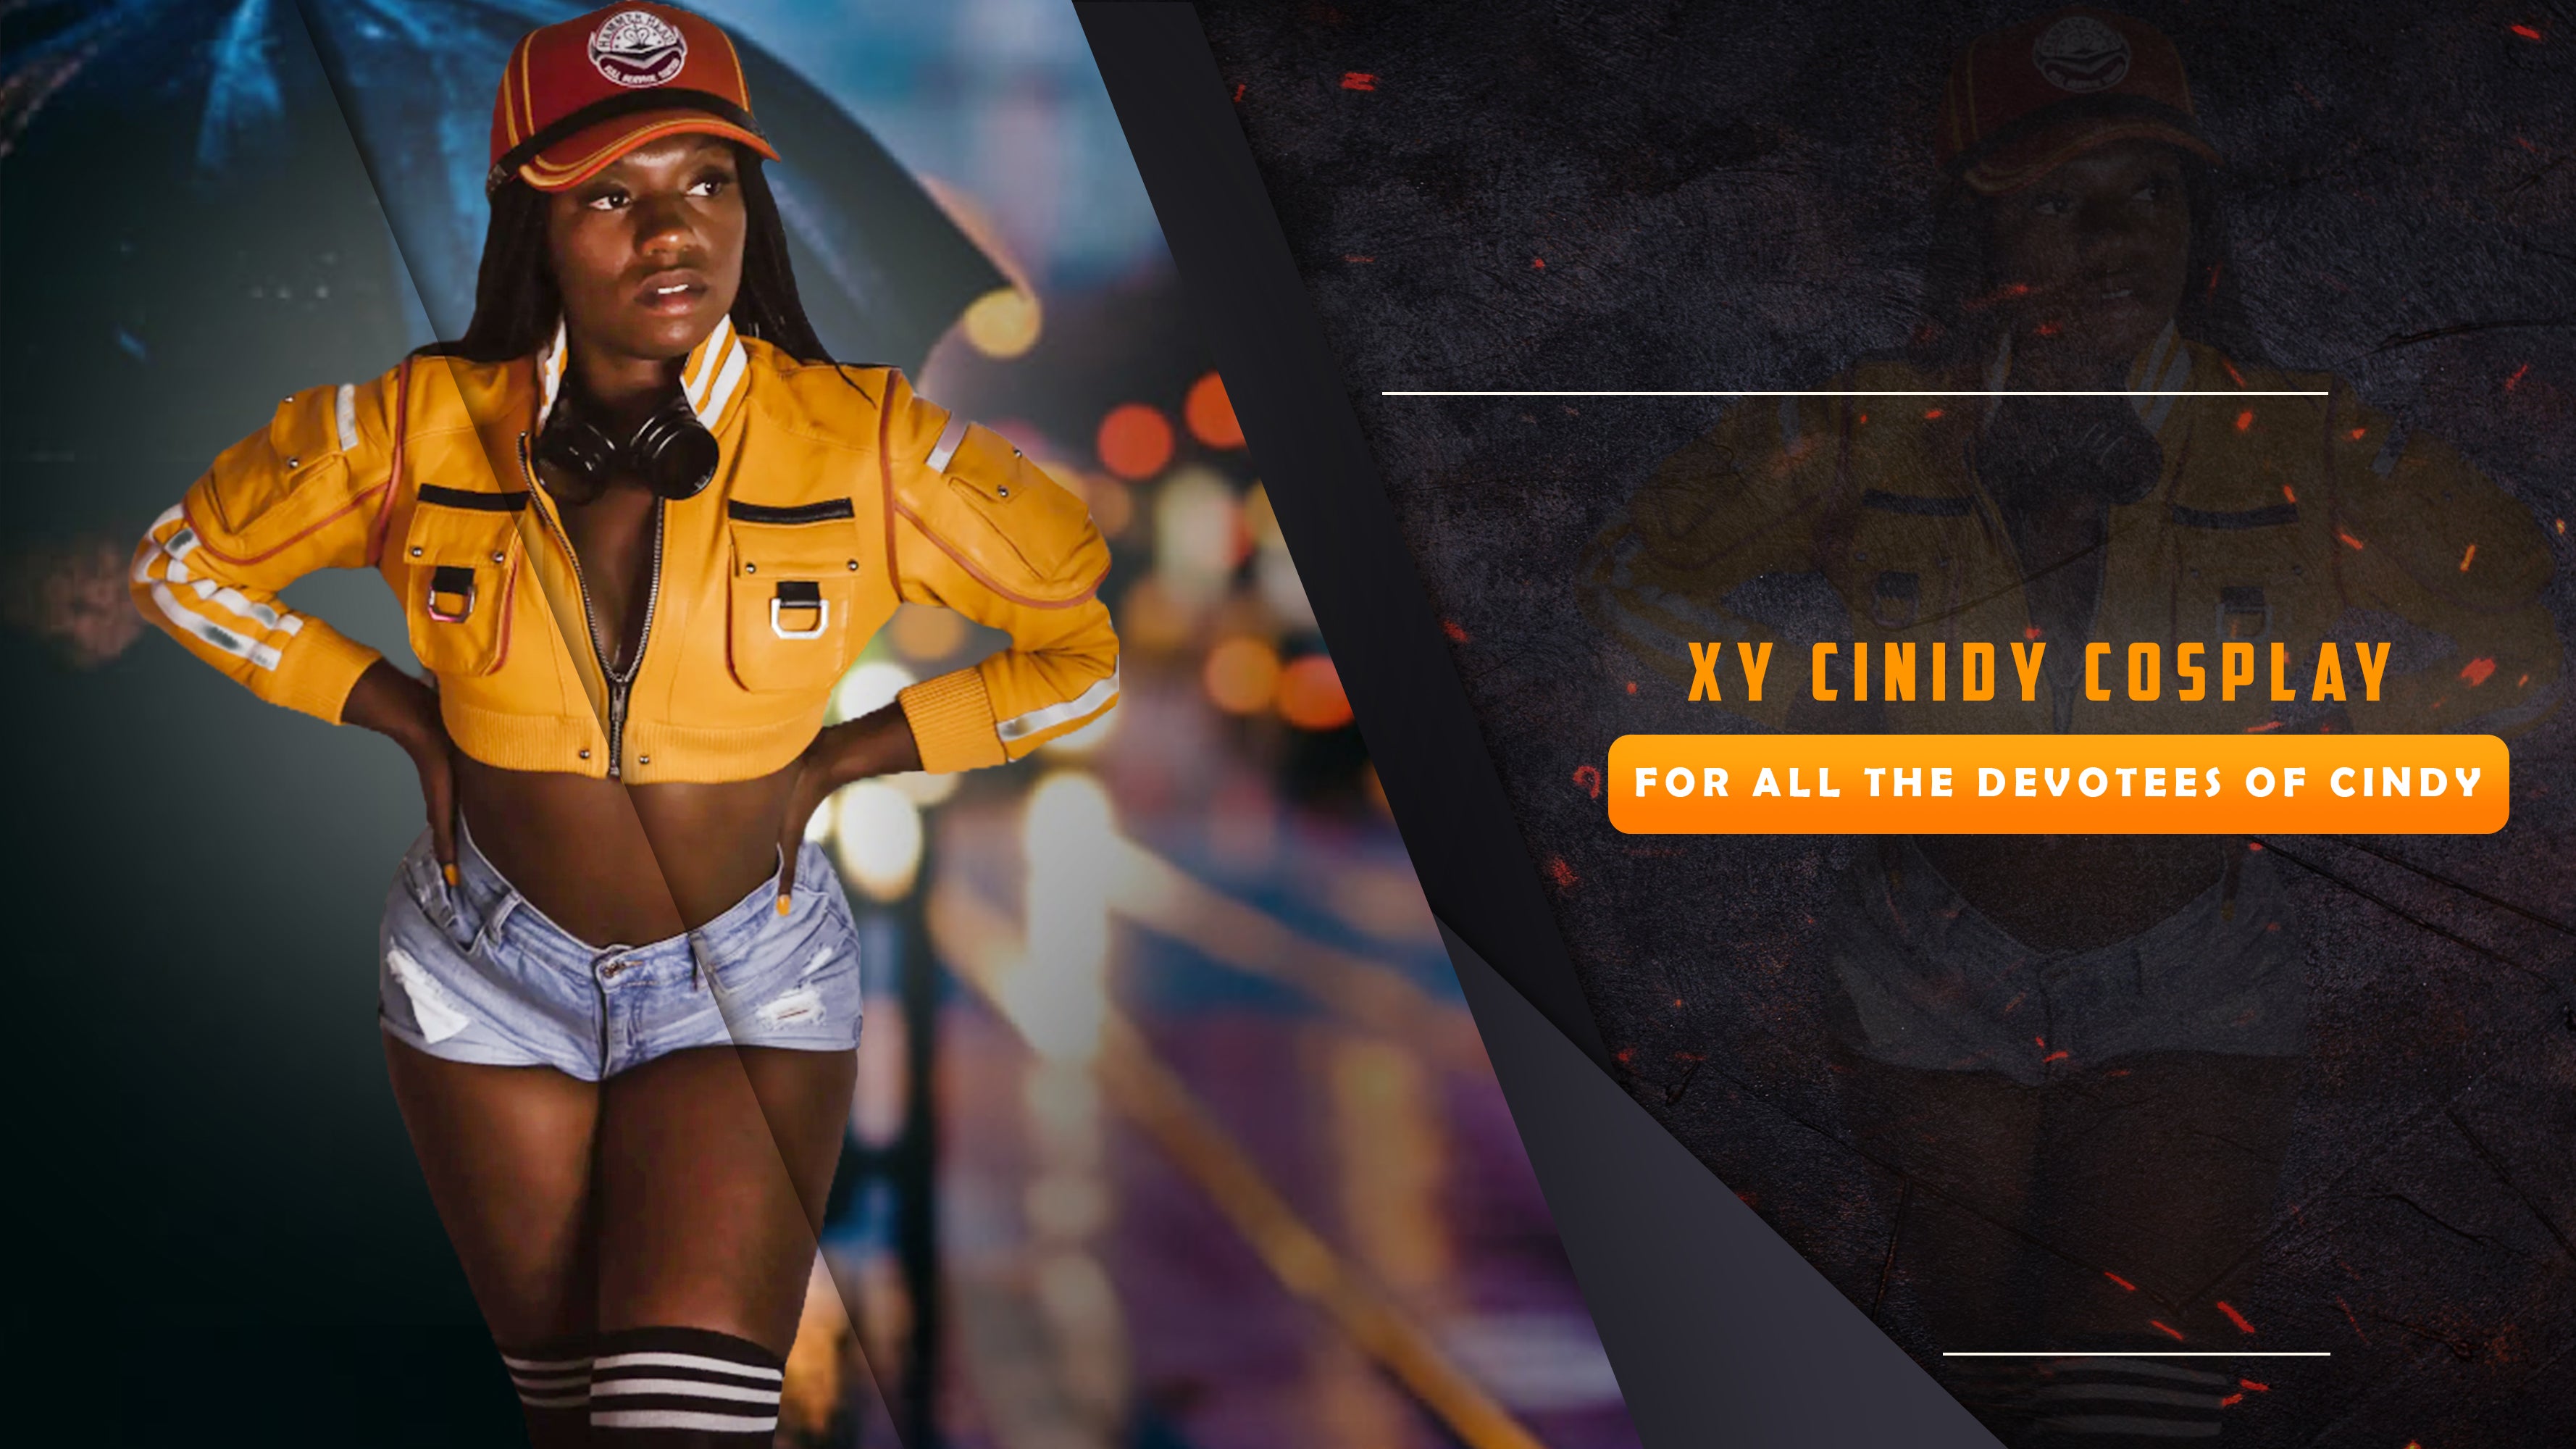 XV Cindy Cosplay for all the Devotees of Cindy